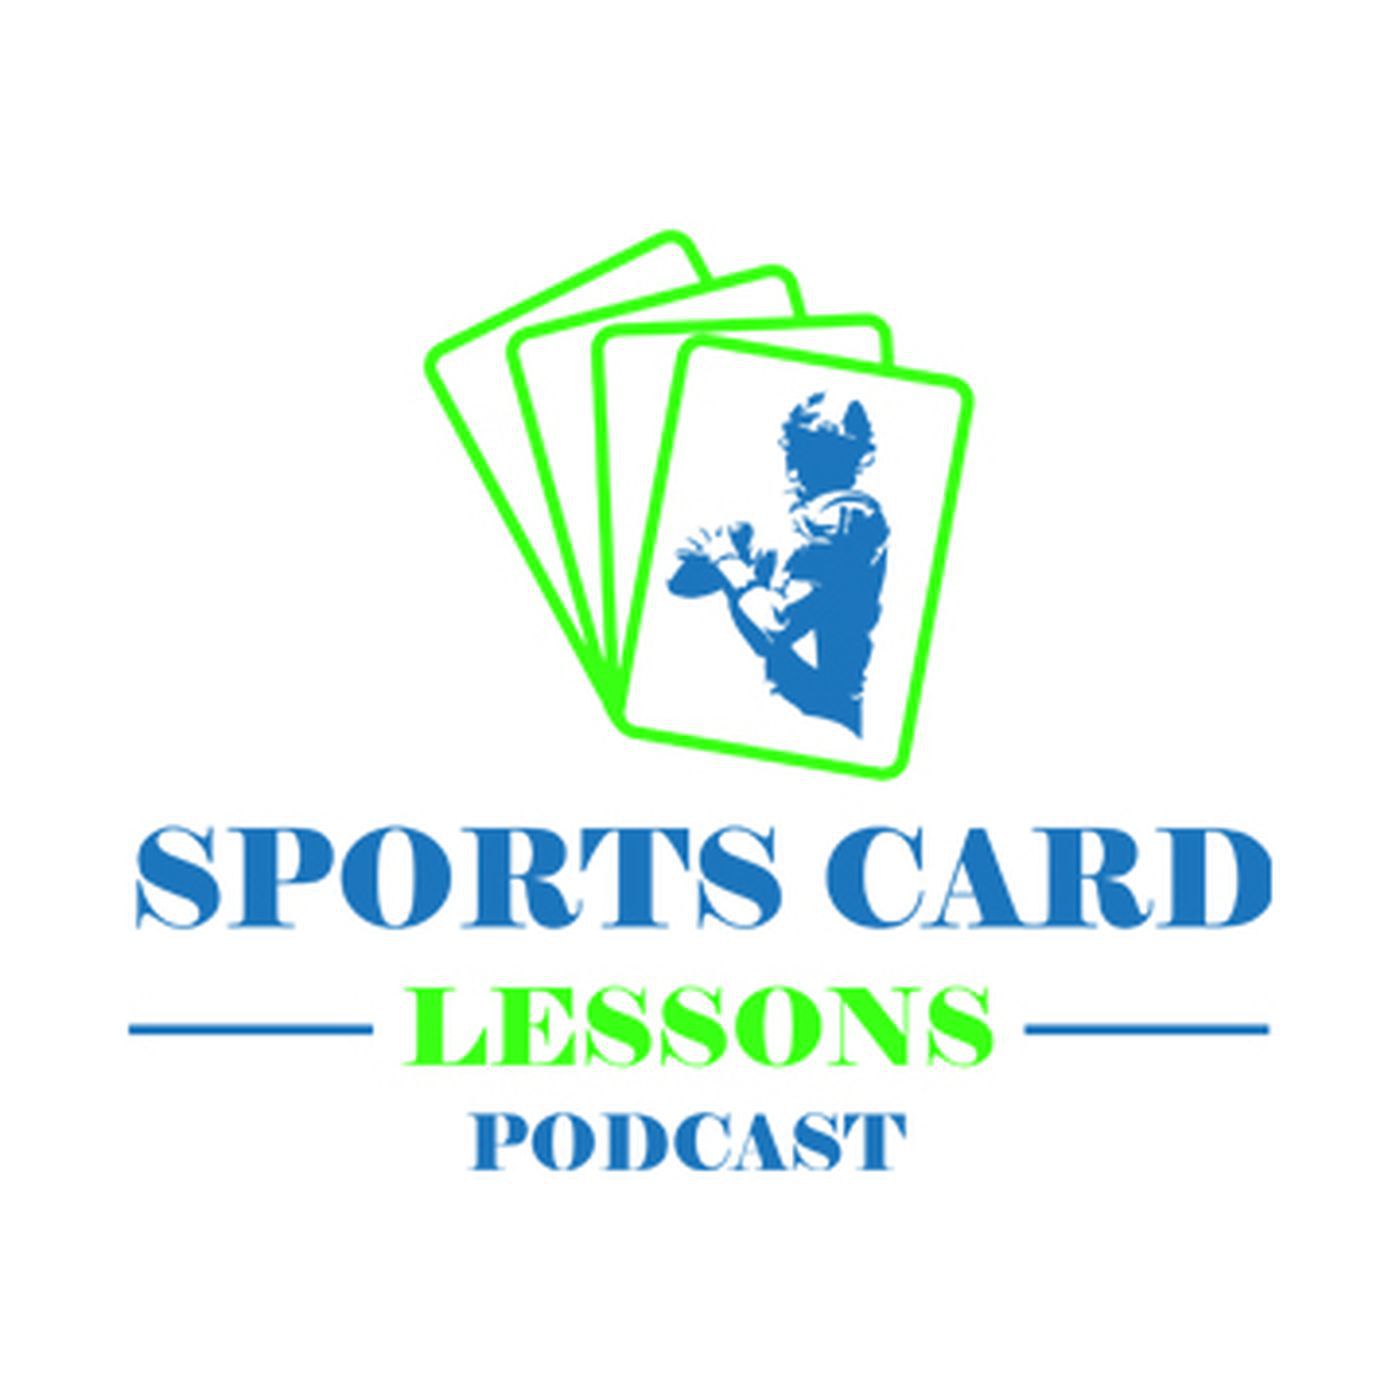 Sports Card Lessons Podcast